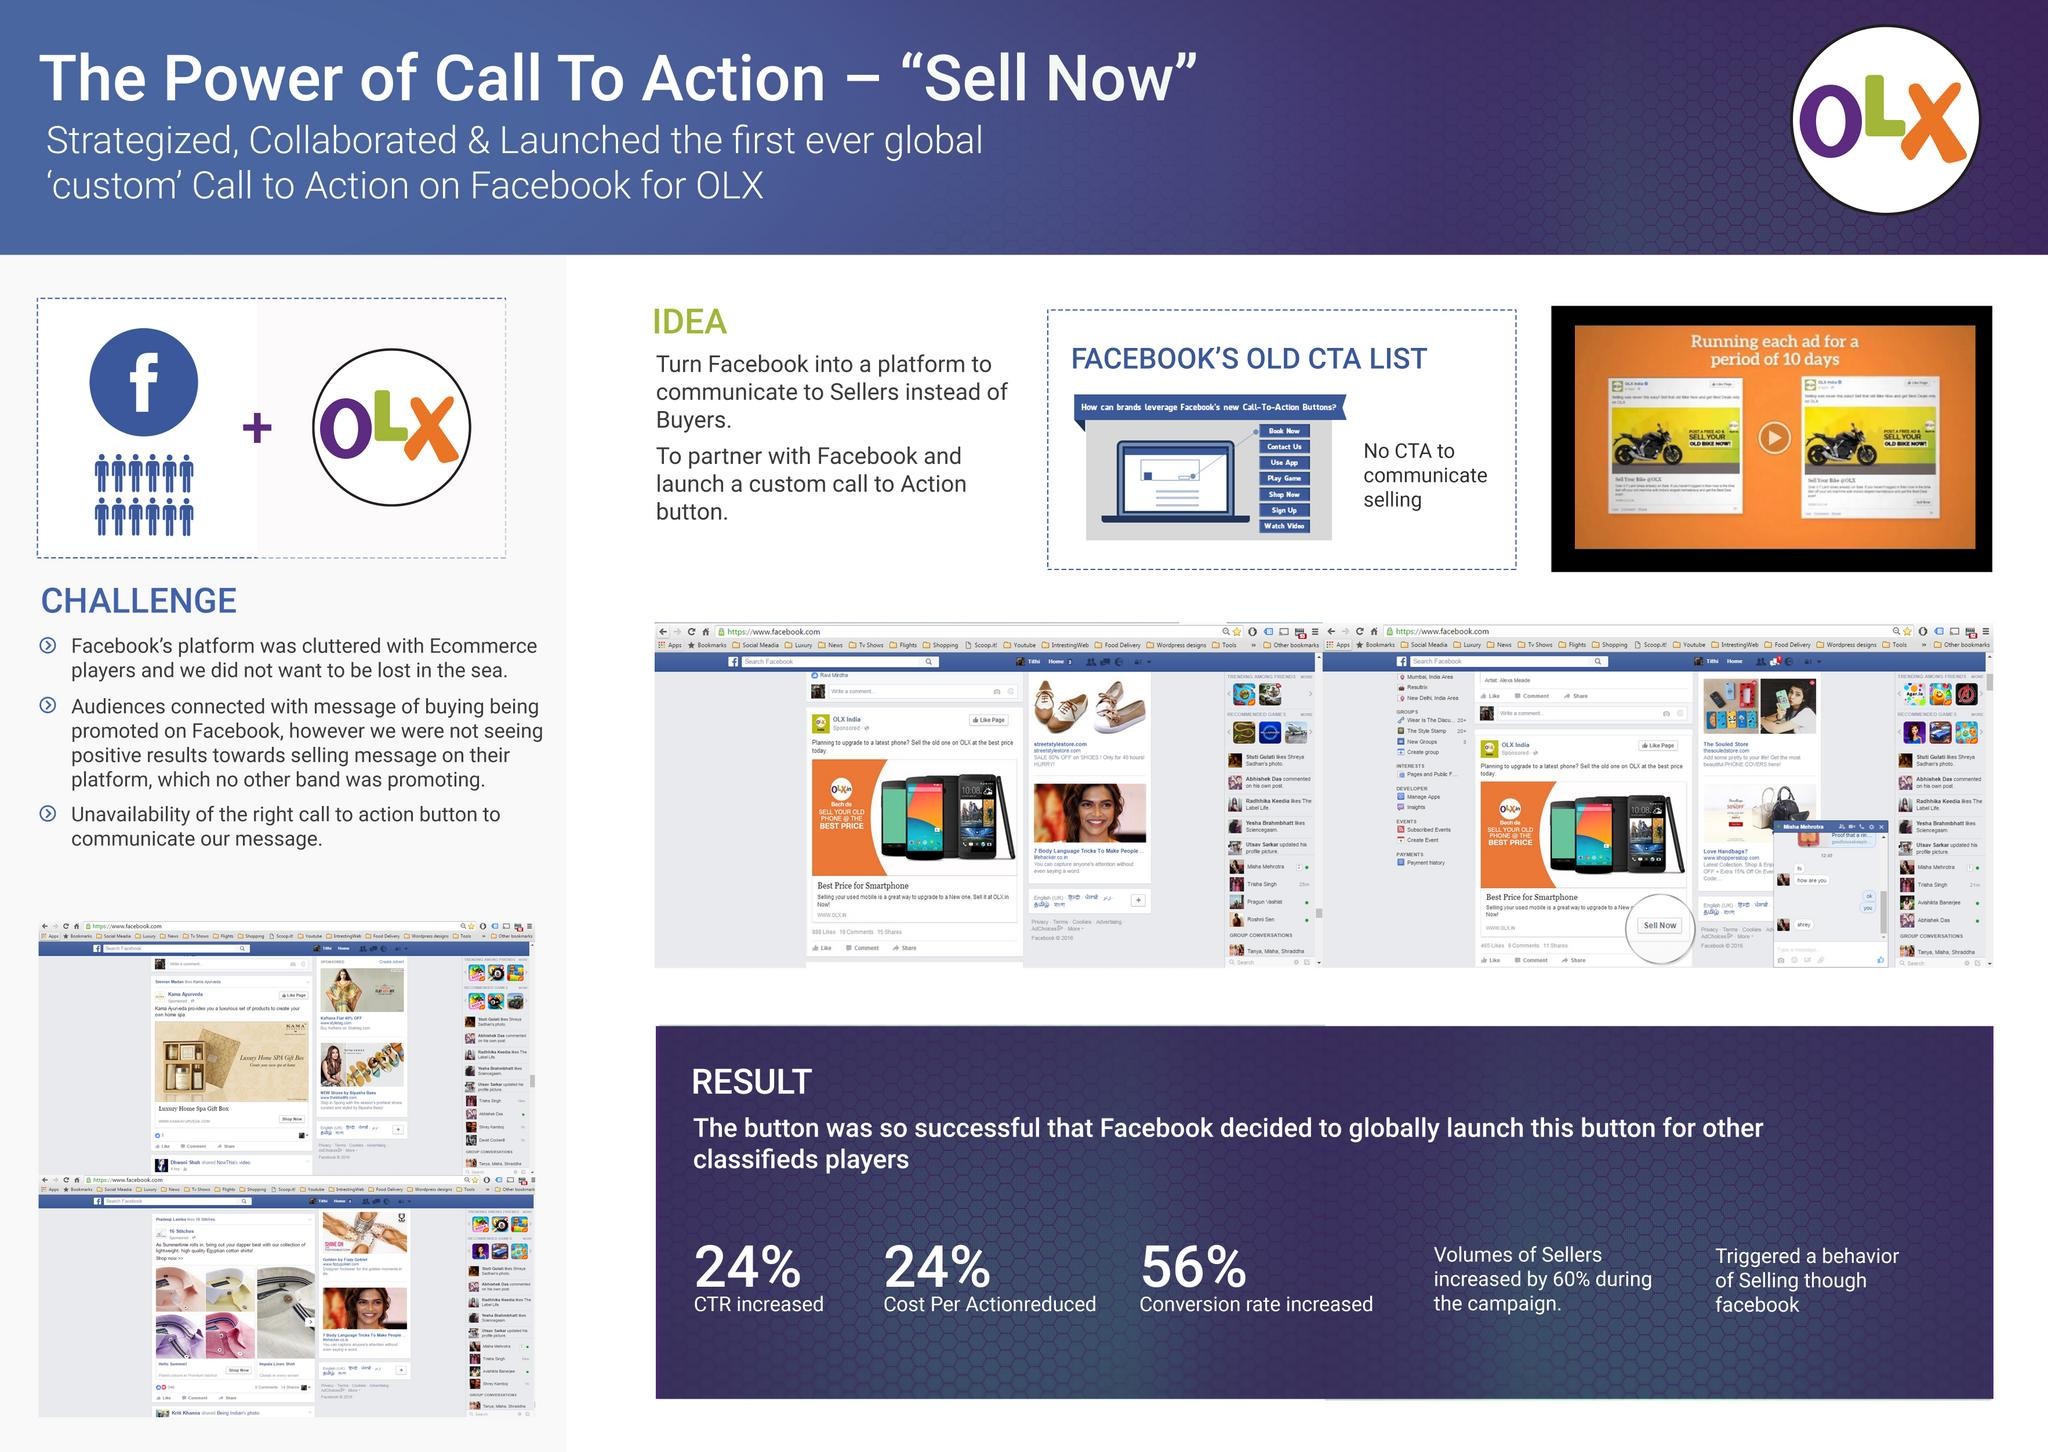 The Power of Call to Action- "Sell Now"